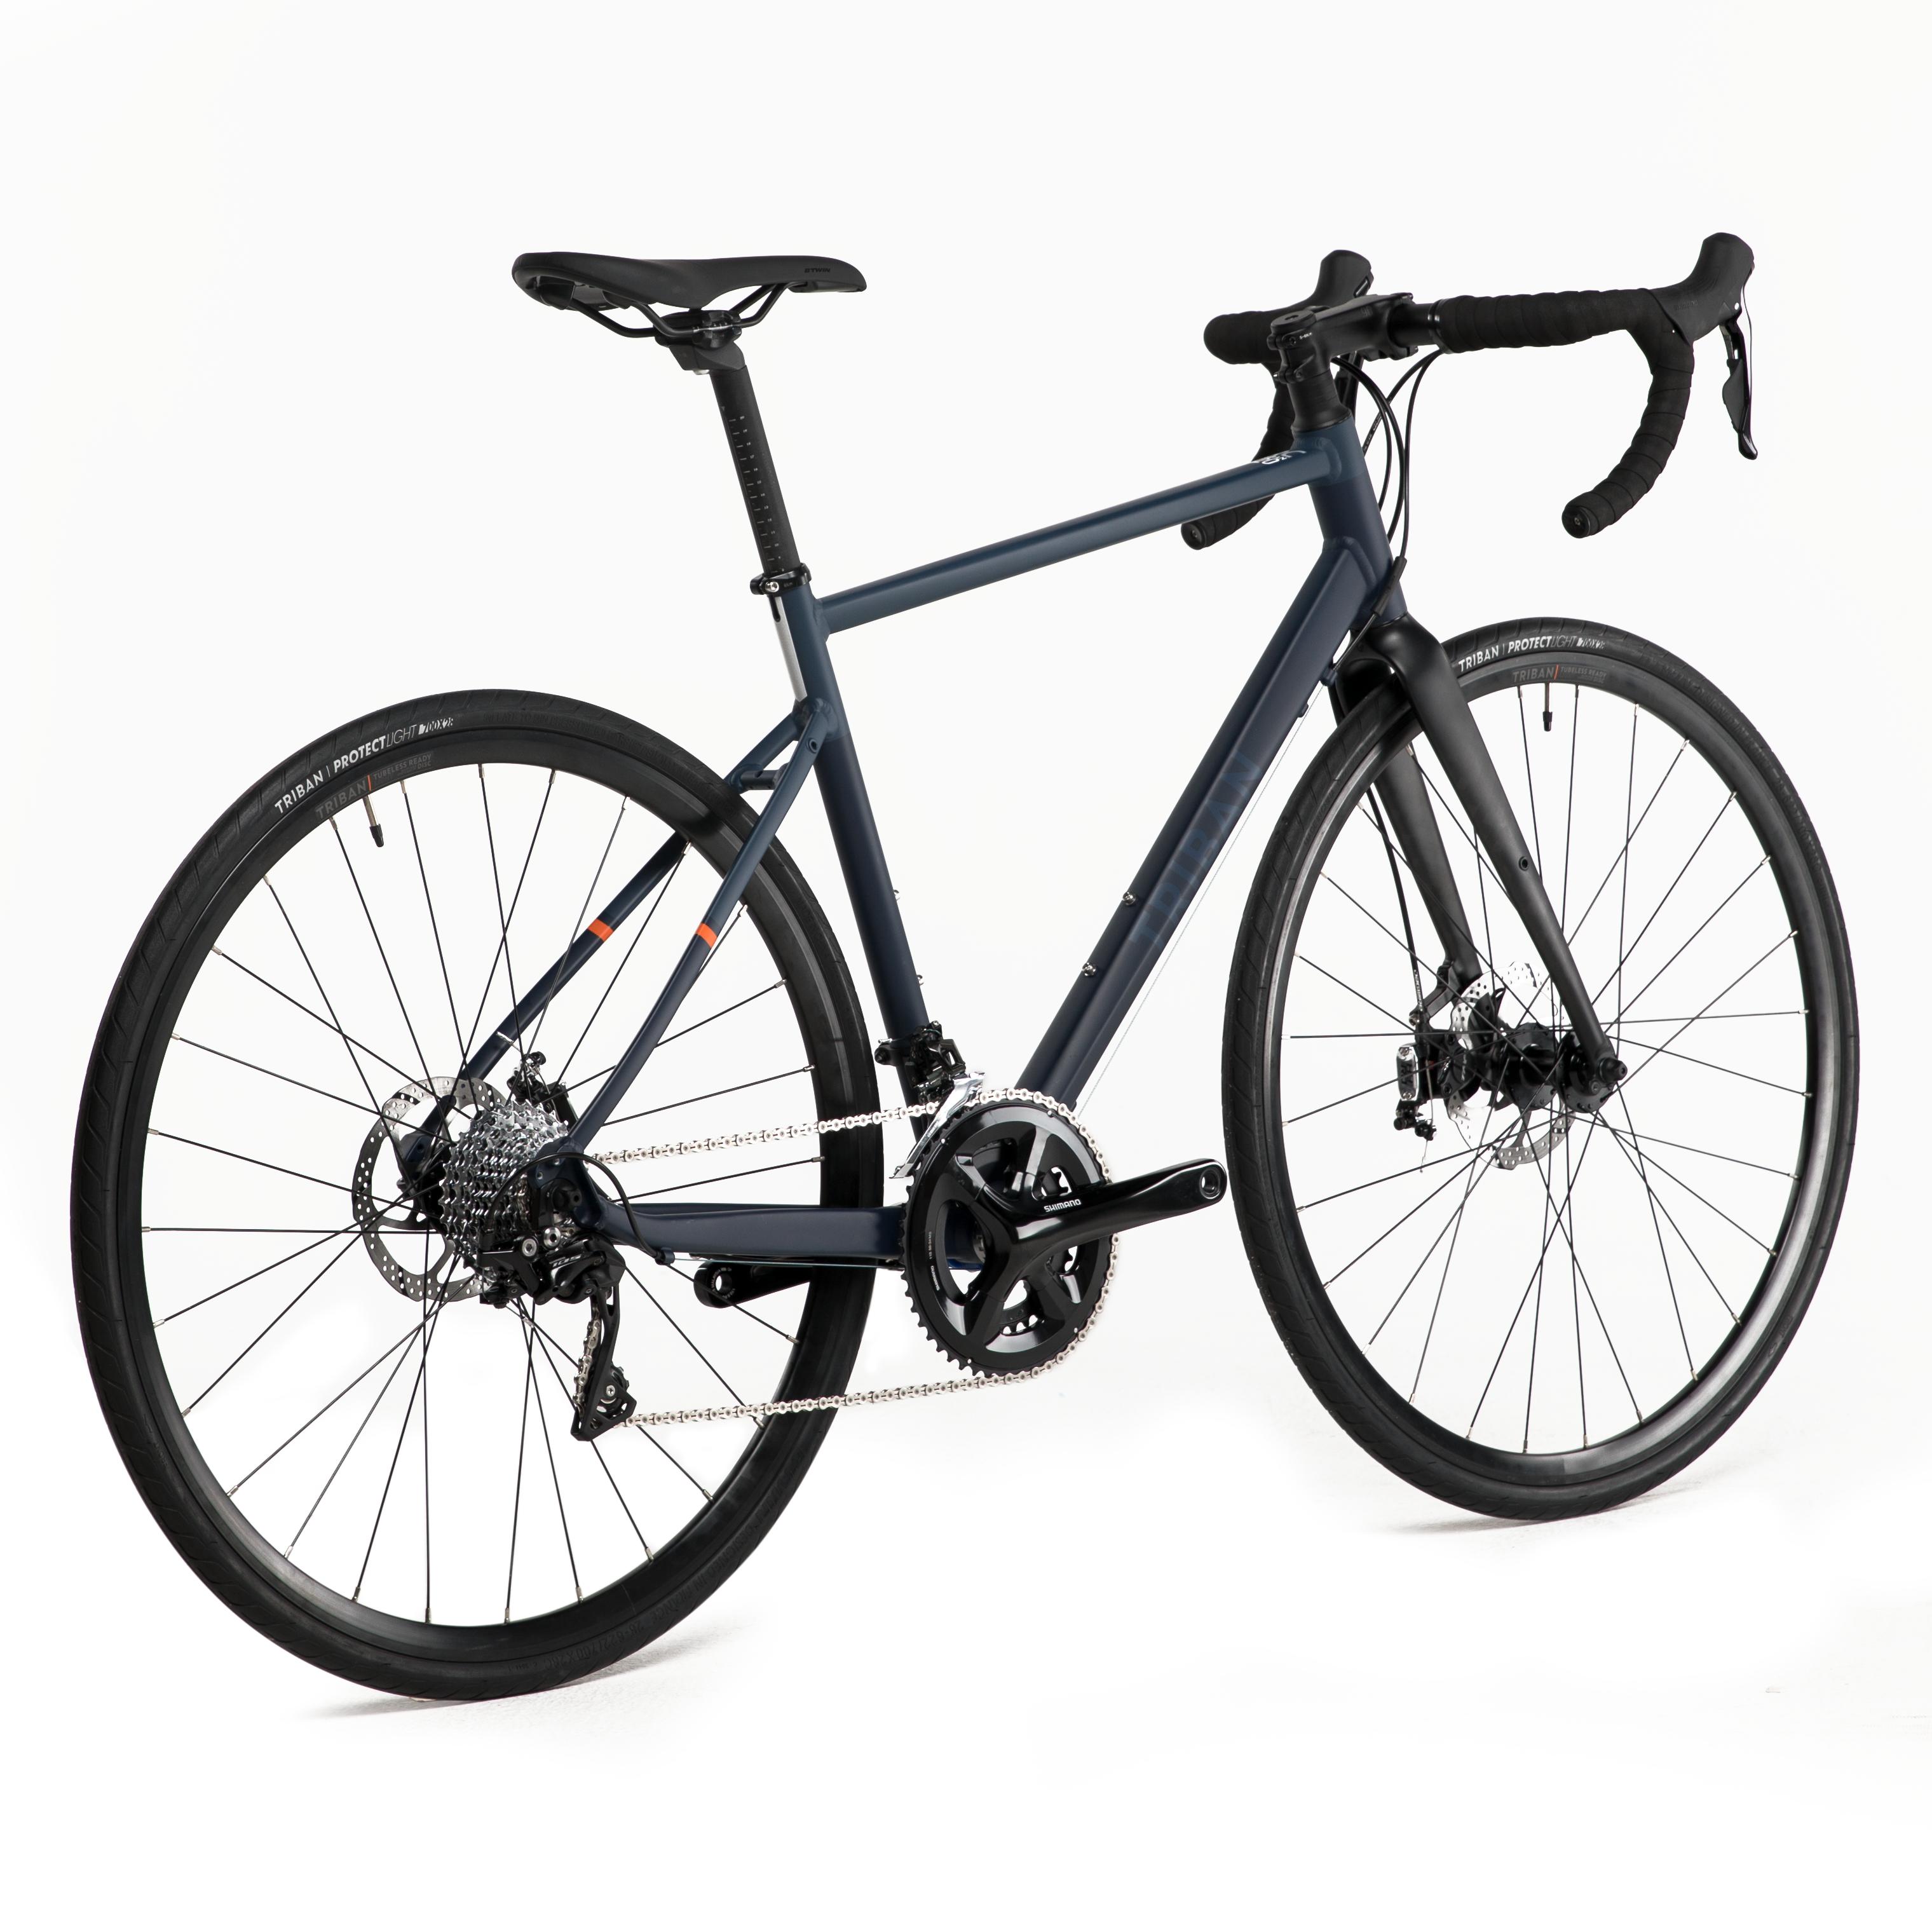 btwin triban rc 520